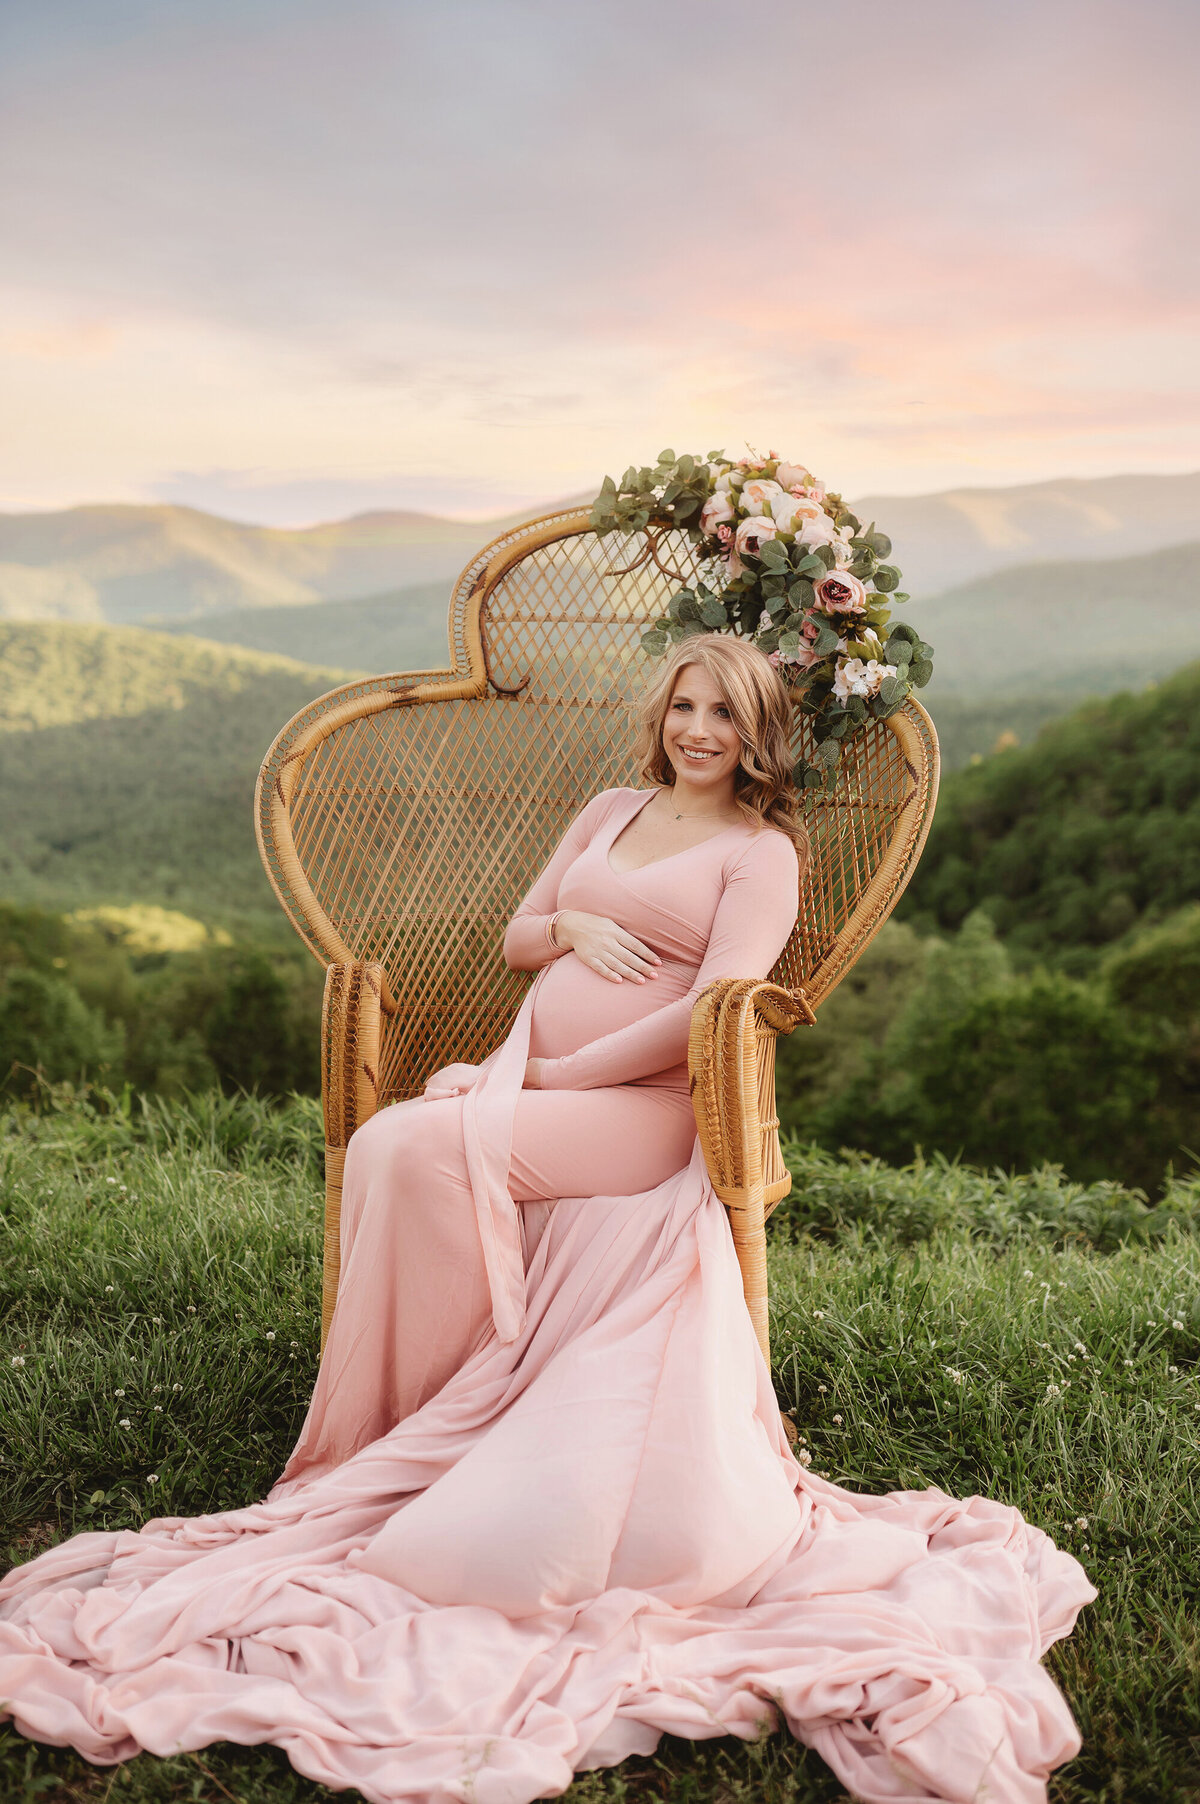 Expectant mother poses for Maternity Photos on the Blue Ridge Parkway in Asheville, NC.